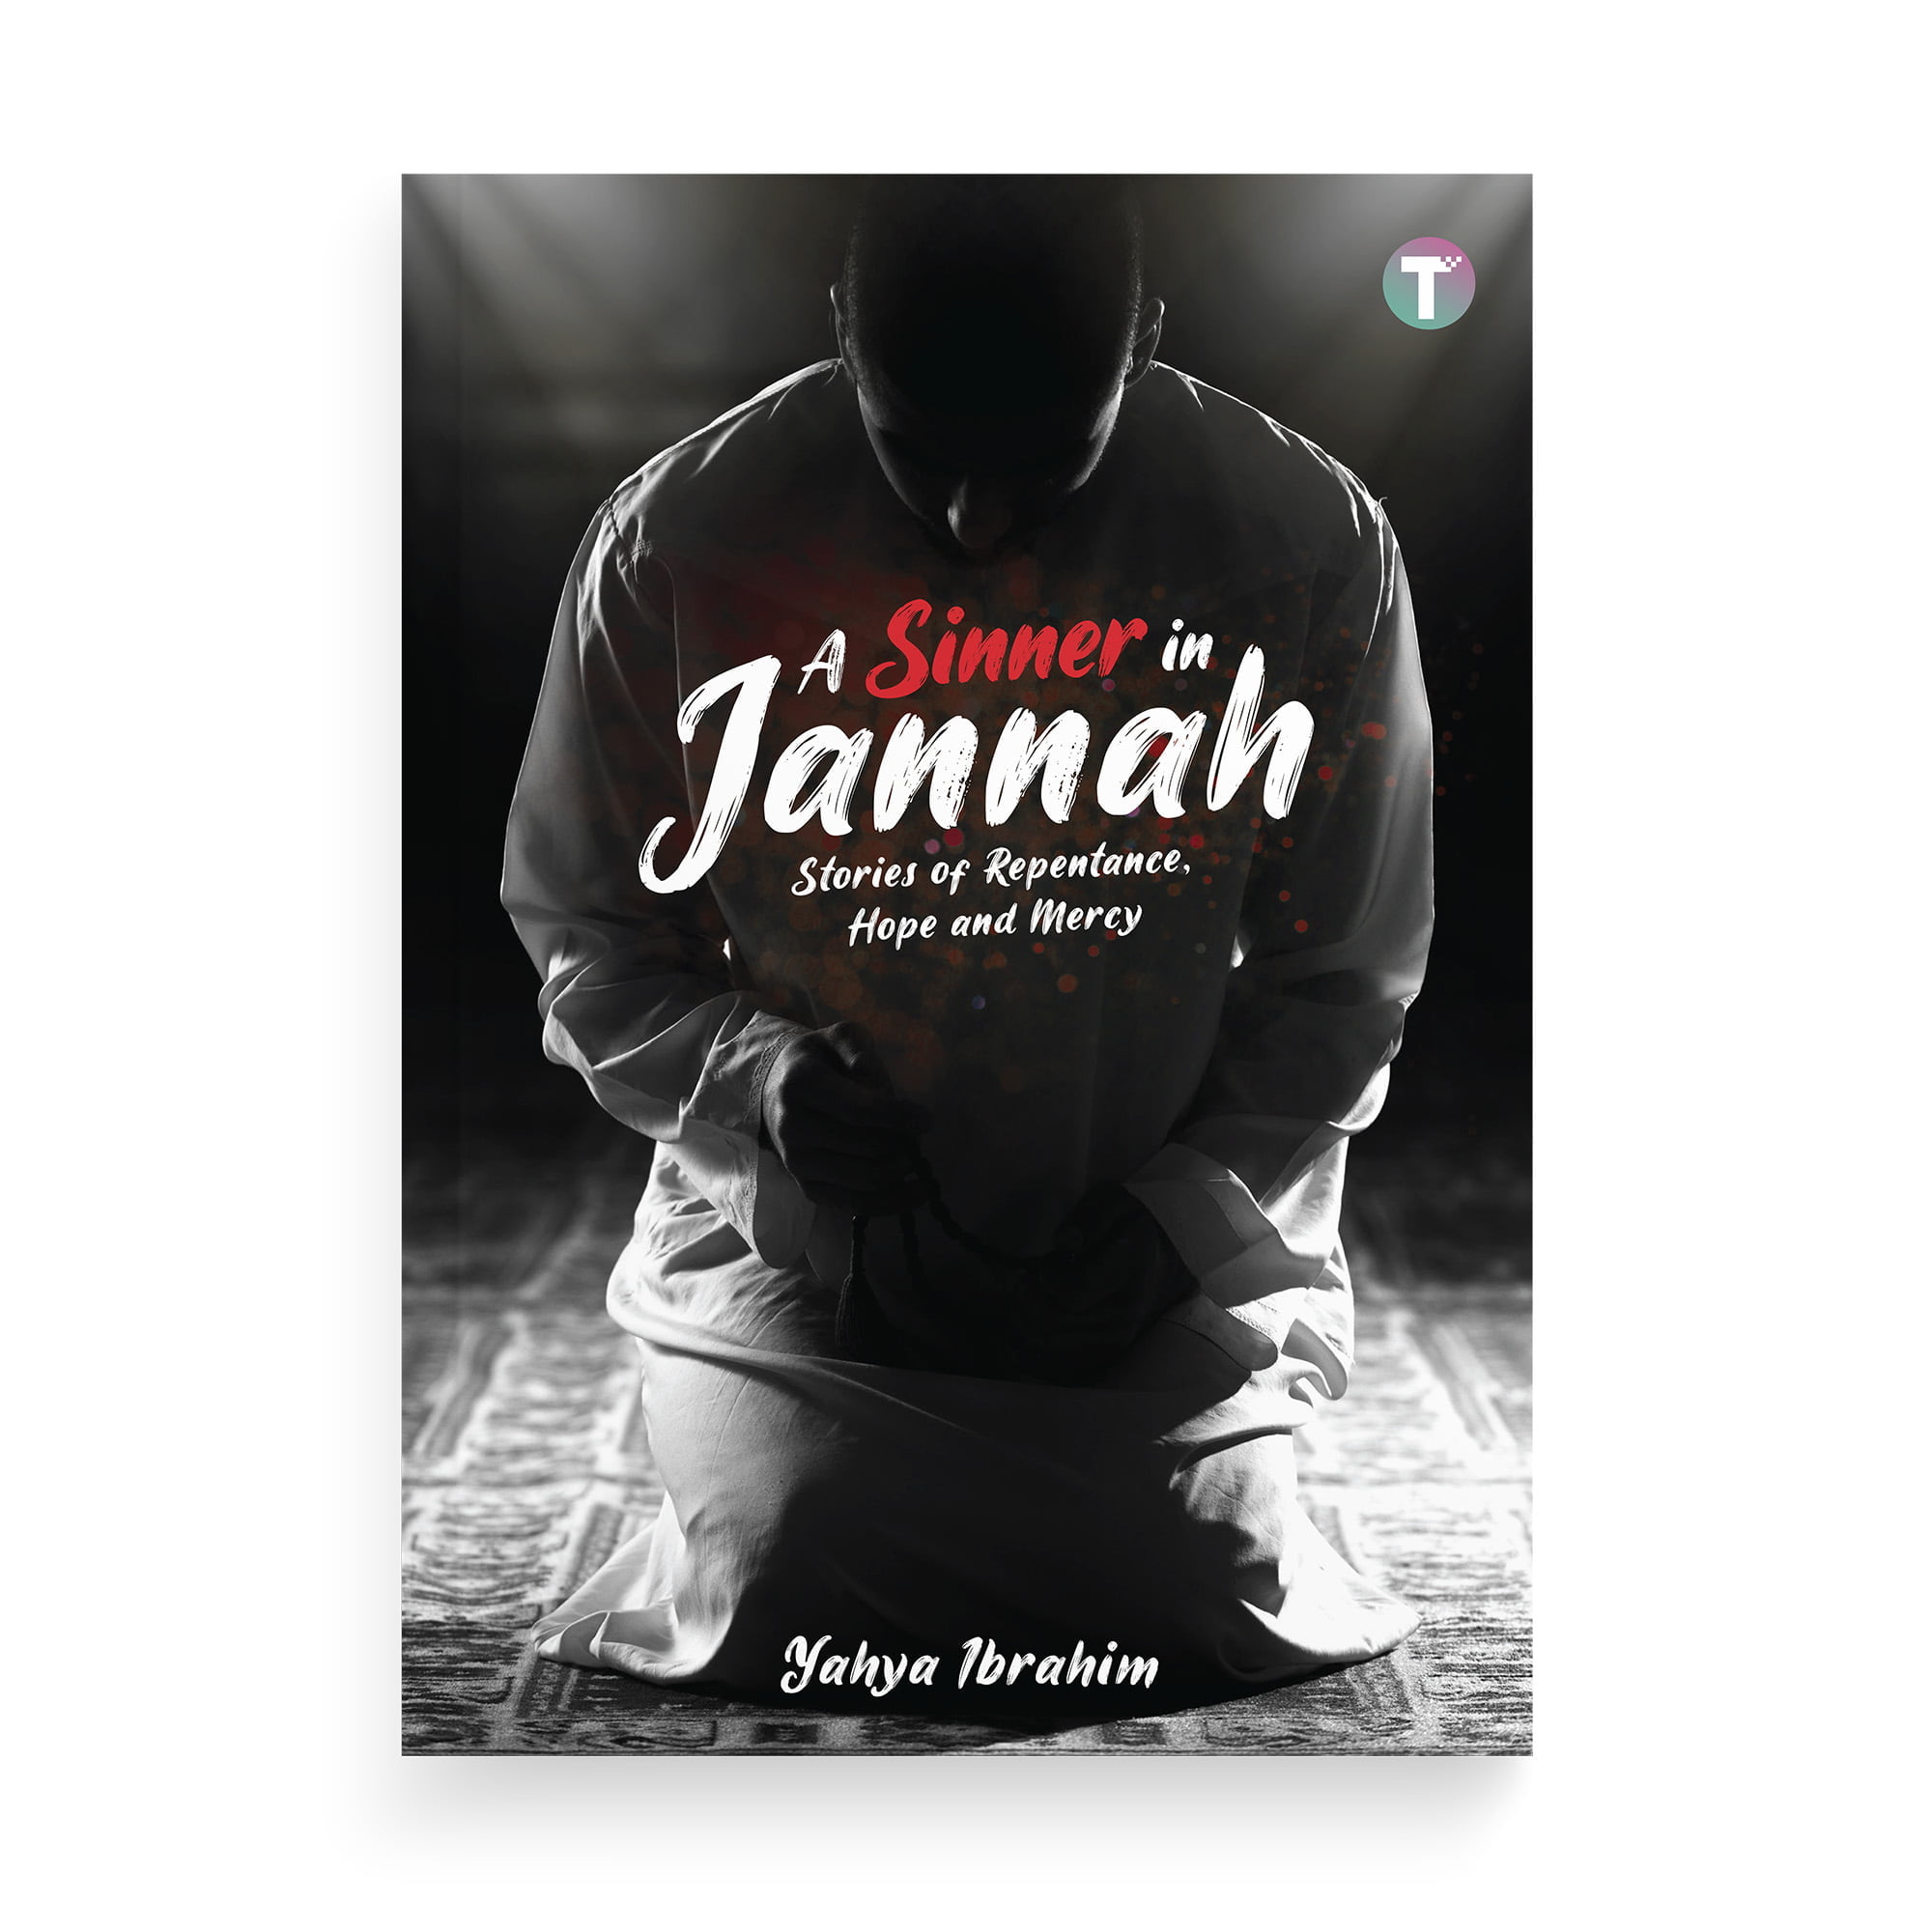 A Sinner in Jannah: Stories of Repentance, Hope and Mercy by Yahya Ibrahim